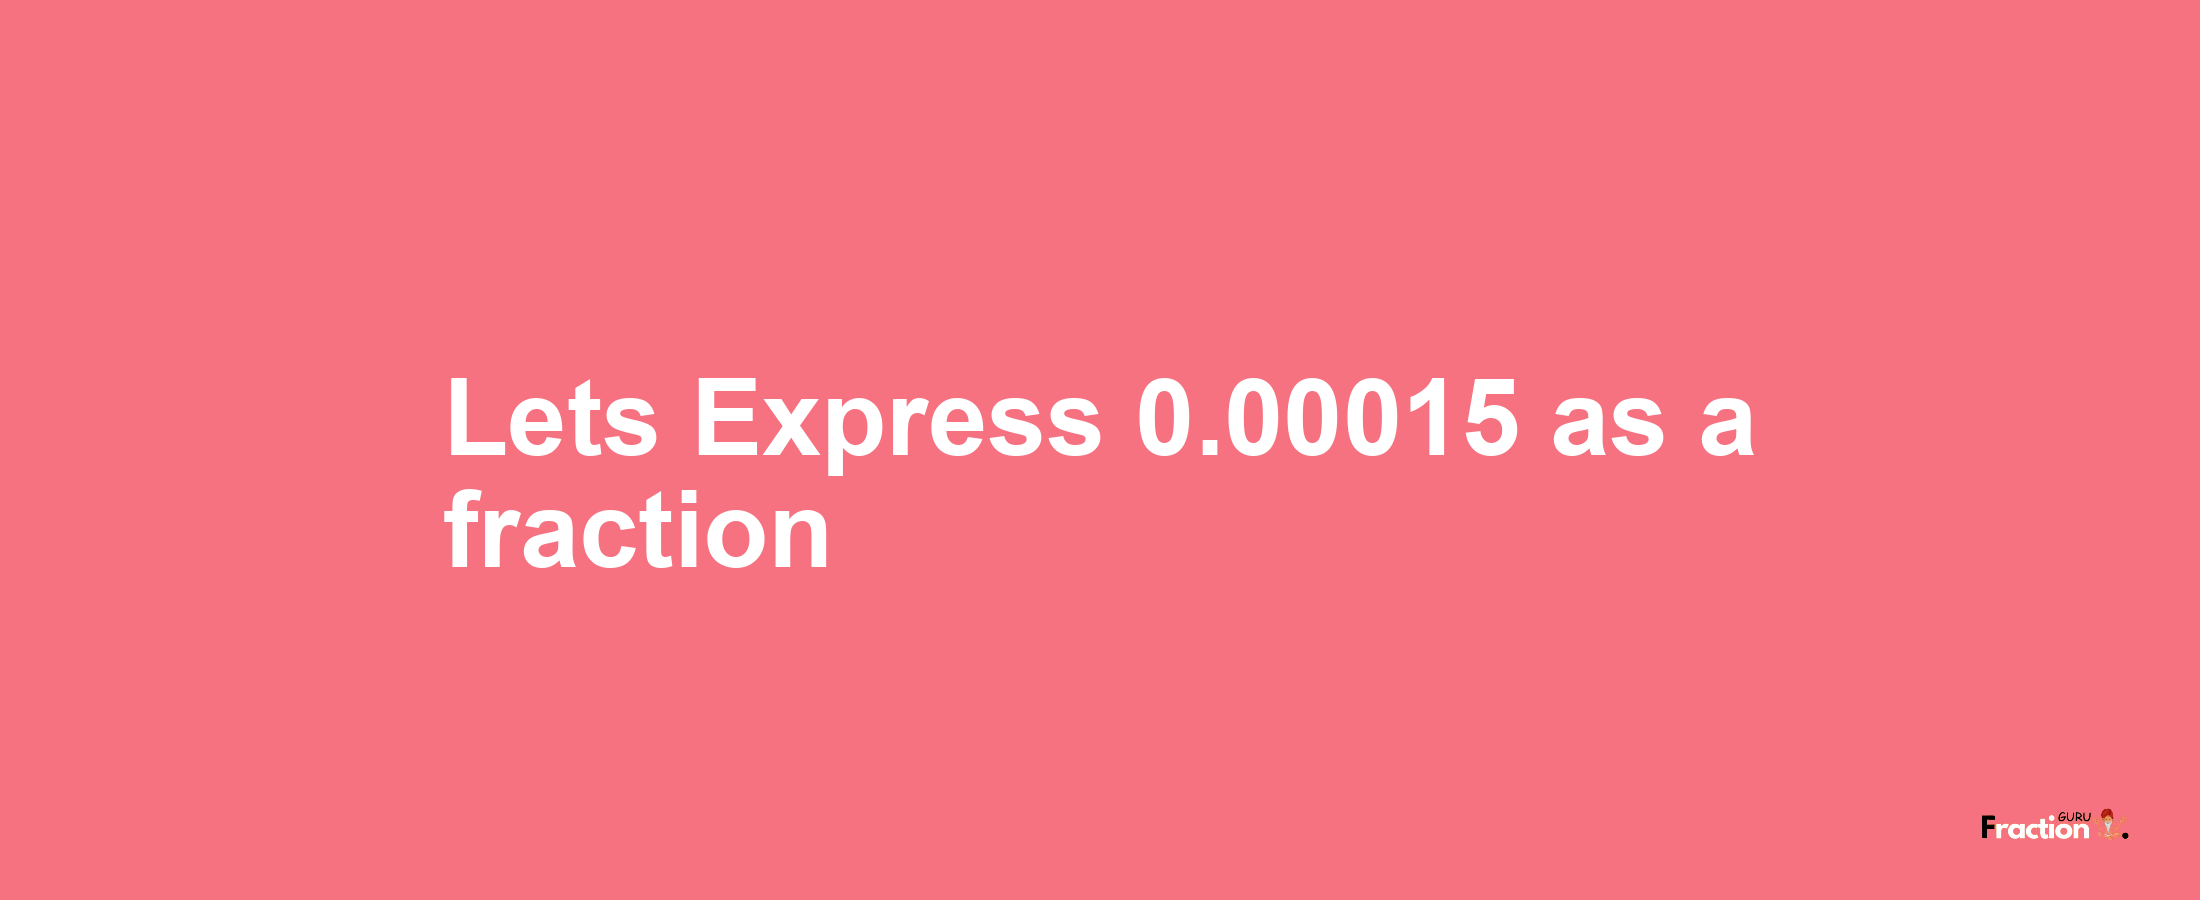 Lets Express 0.00015 as afraction